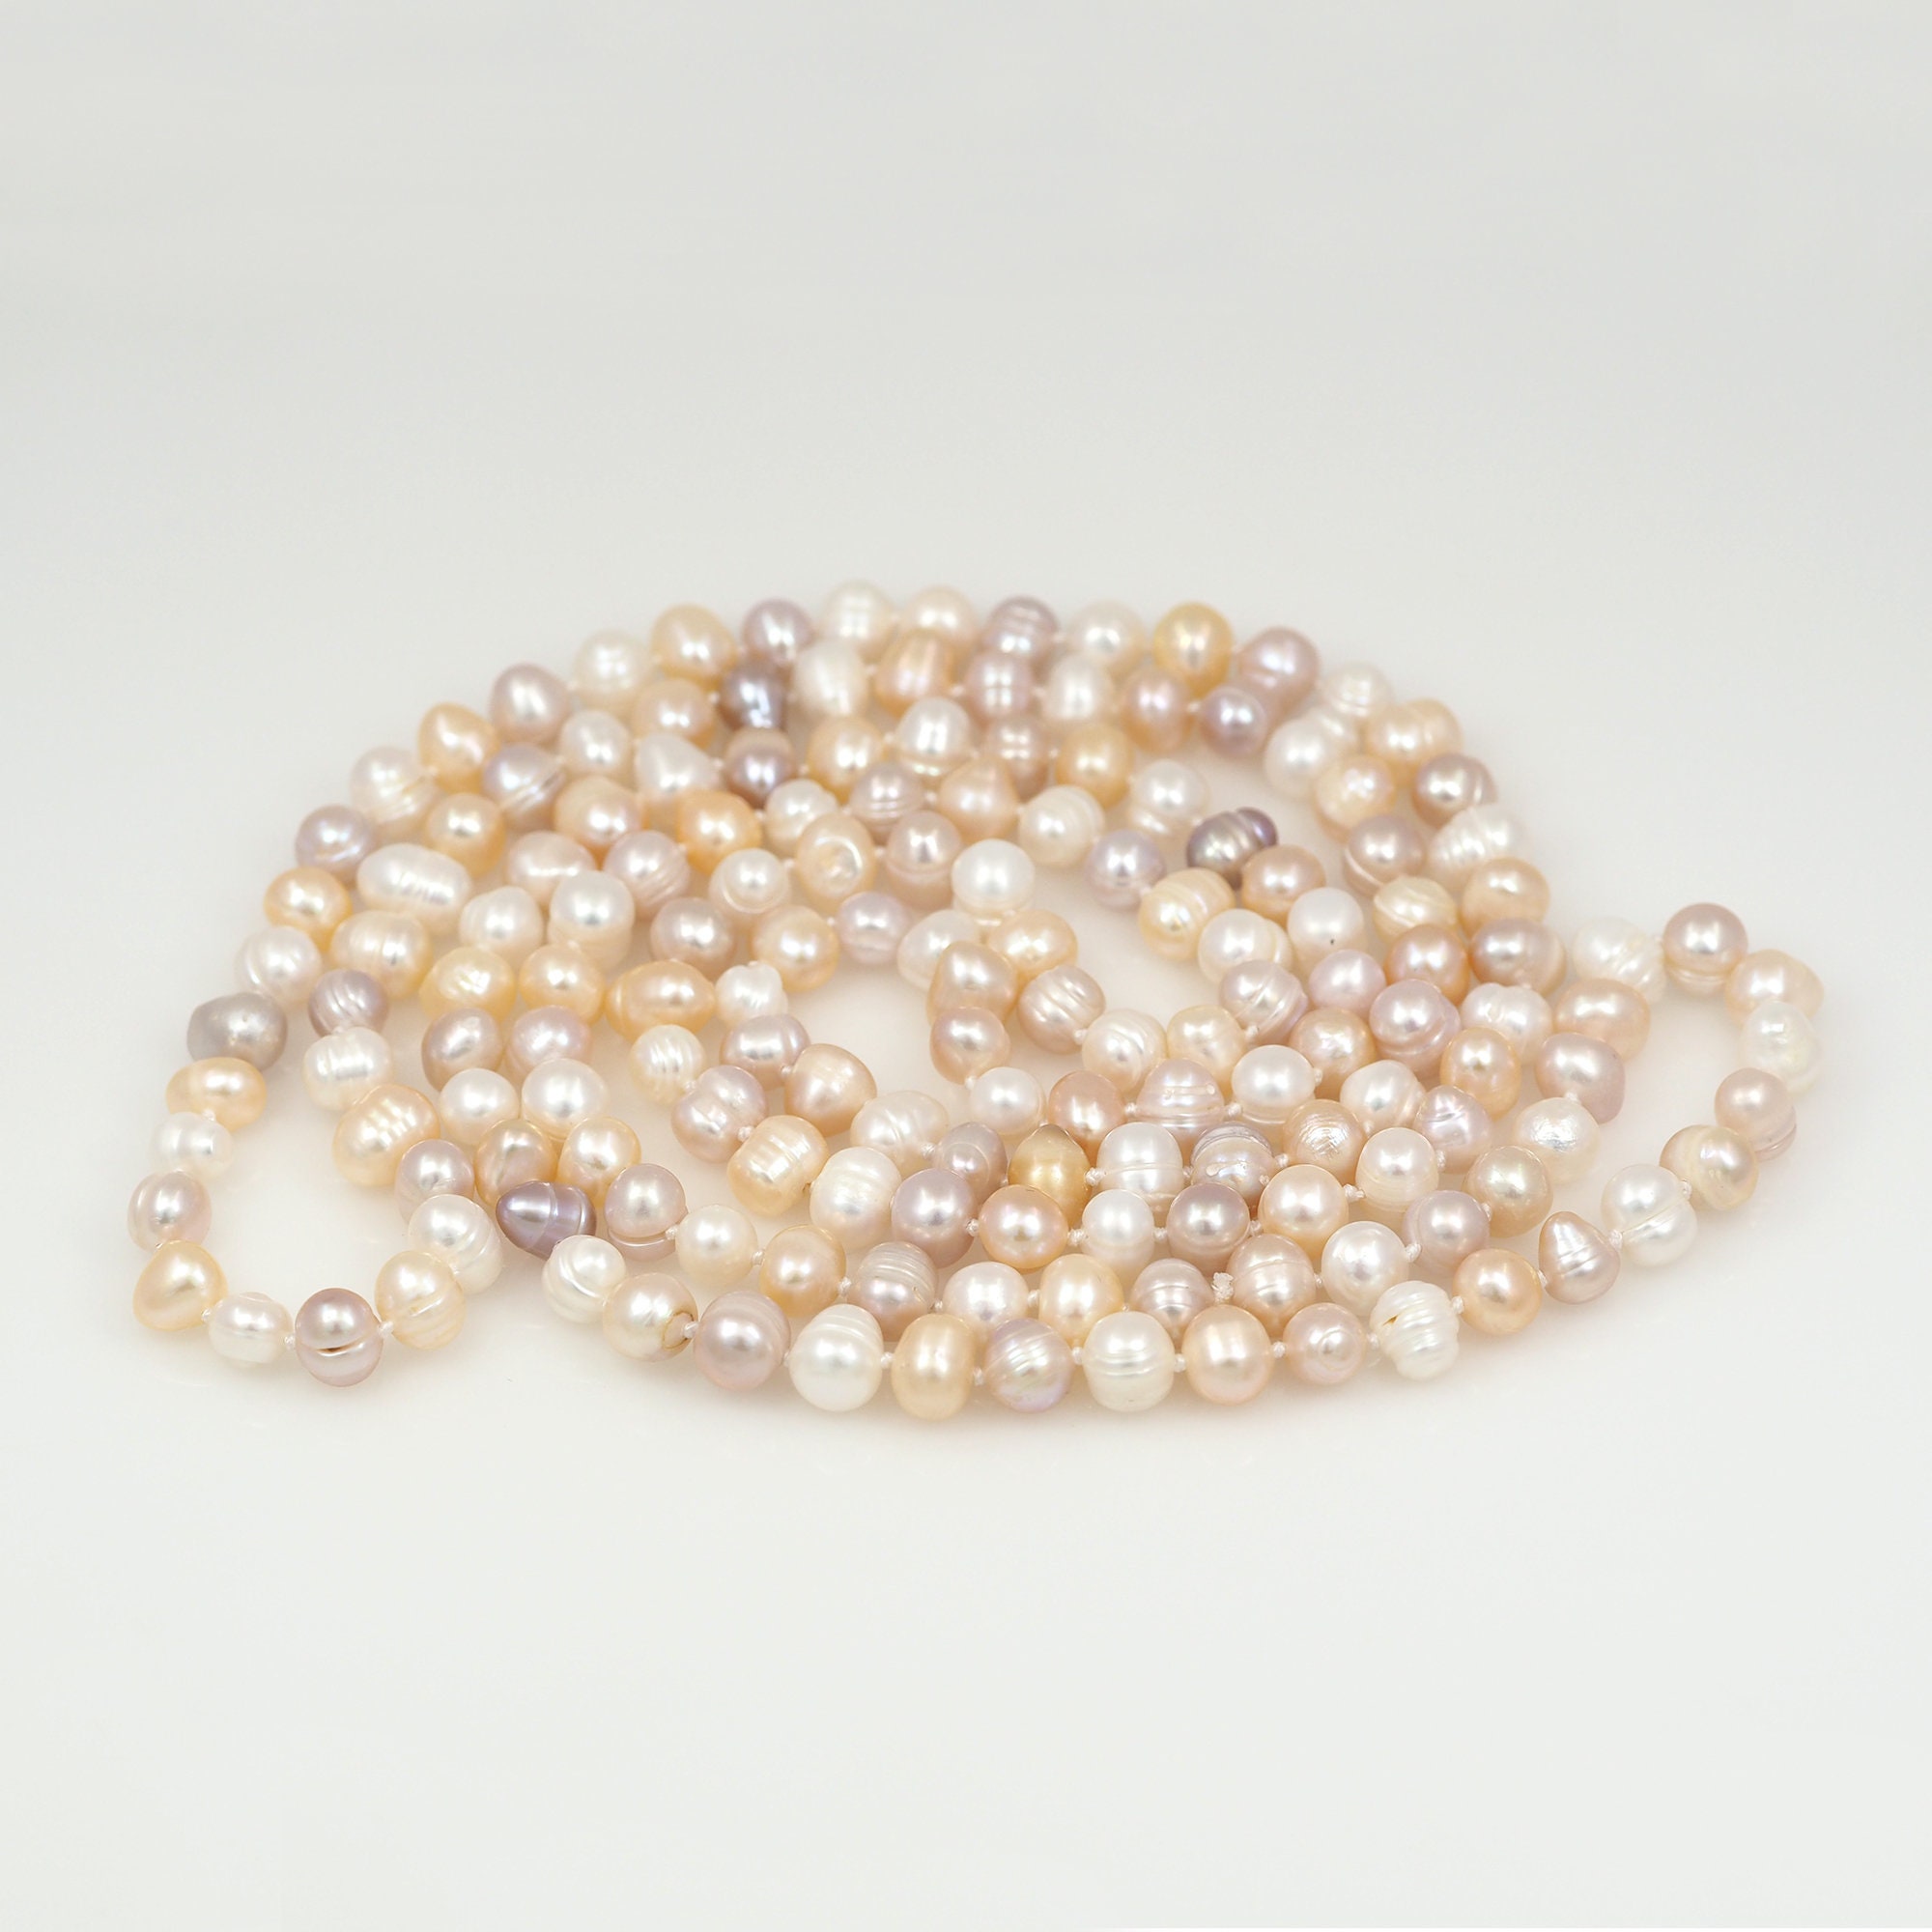 1 Str, Freshwater Pearls, Irregular Pearls, Natural White Pearl Necklace, AAA, DIY Pearl Accessories, Multi-Size Pearls, Length 35cm